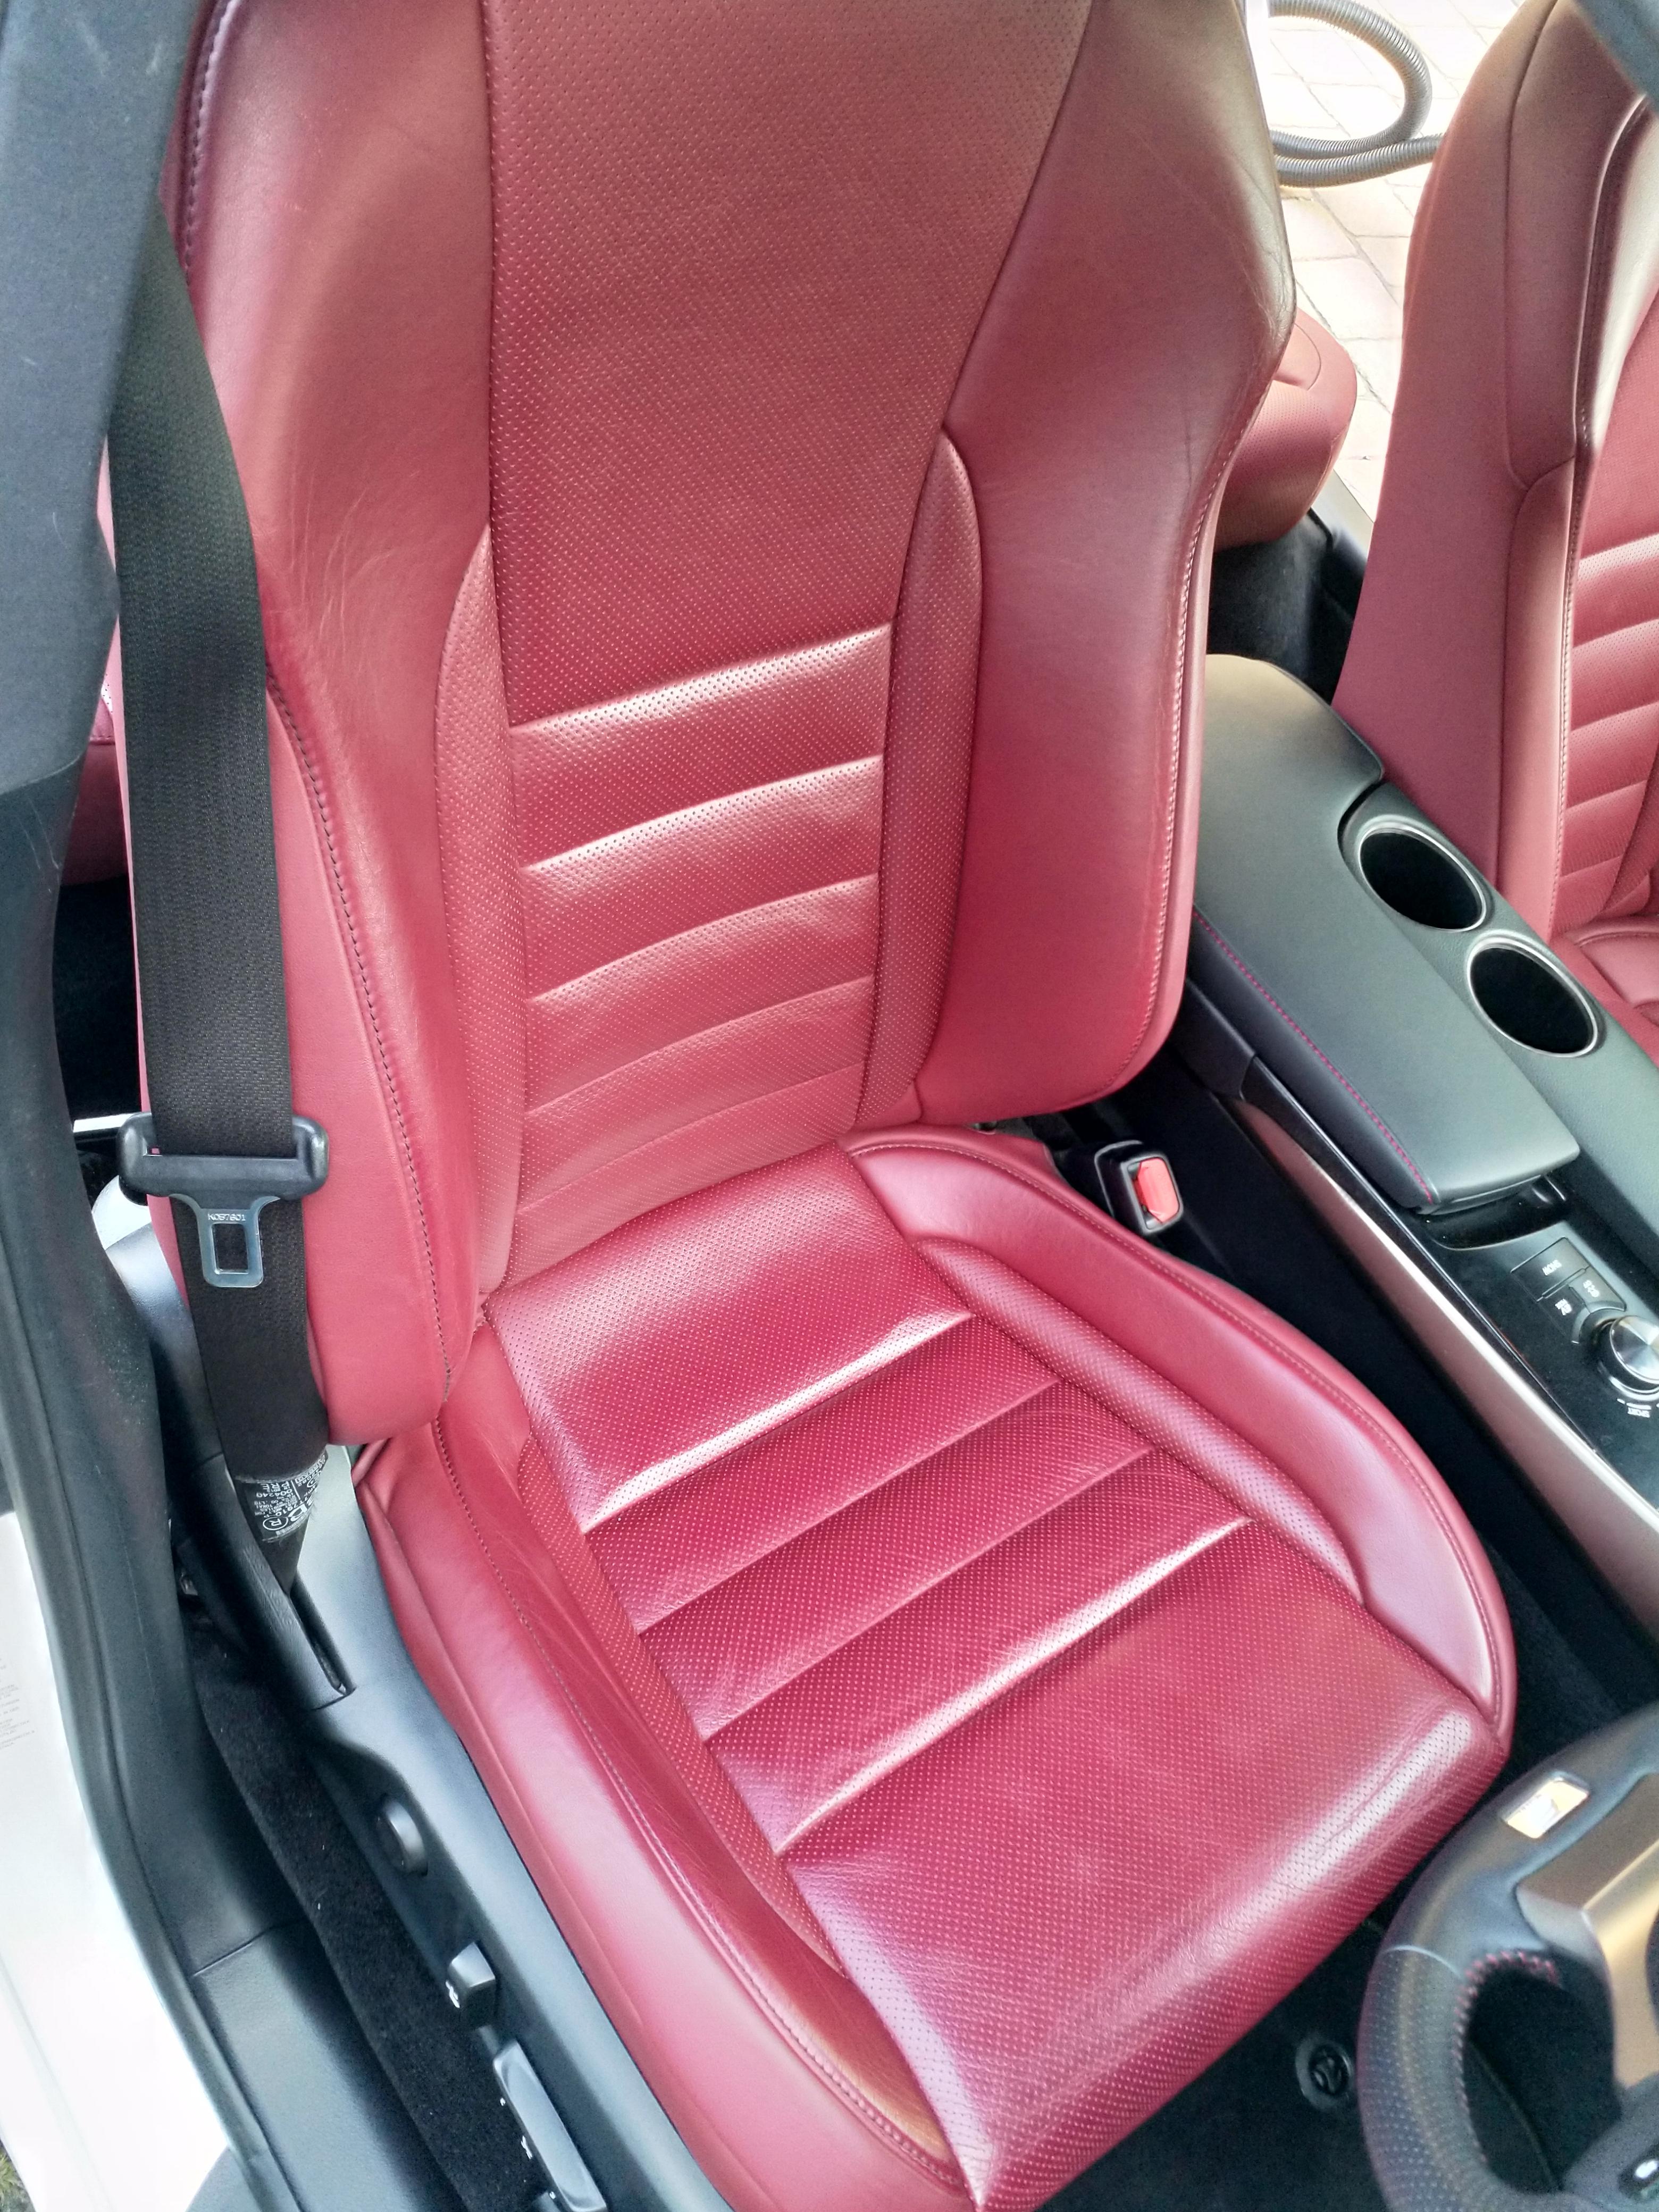 Leather Seat Clean Is300h F Sport Lexus Car Care Detailing Owners Club - What To Use Clean Lexus Leather Seats